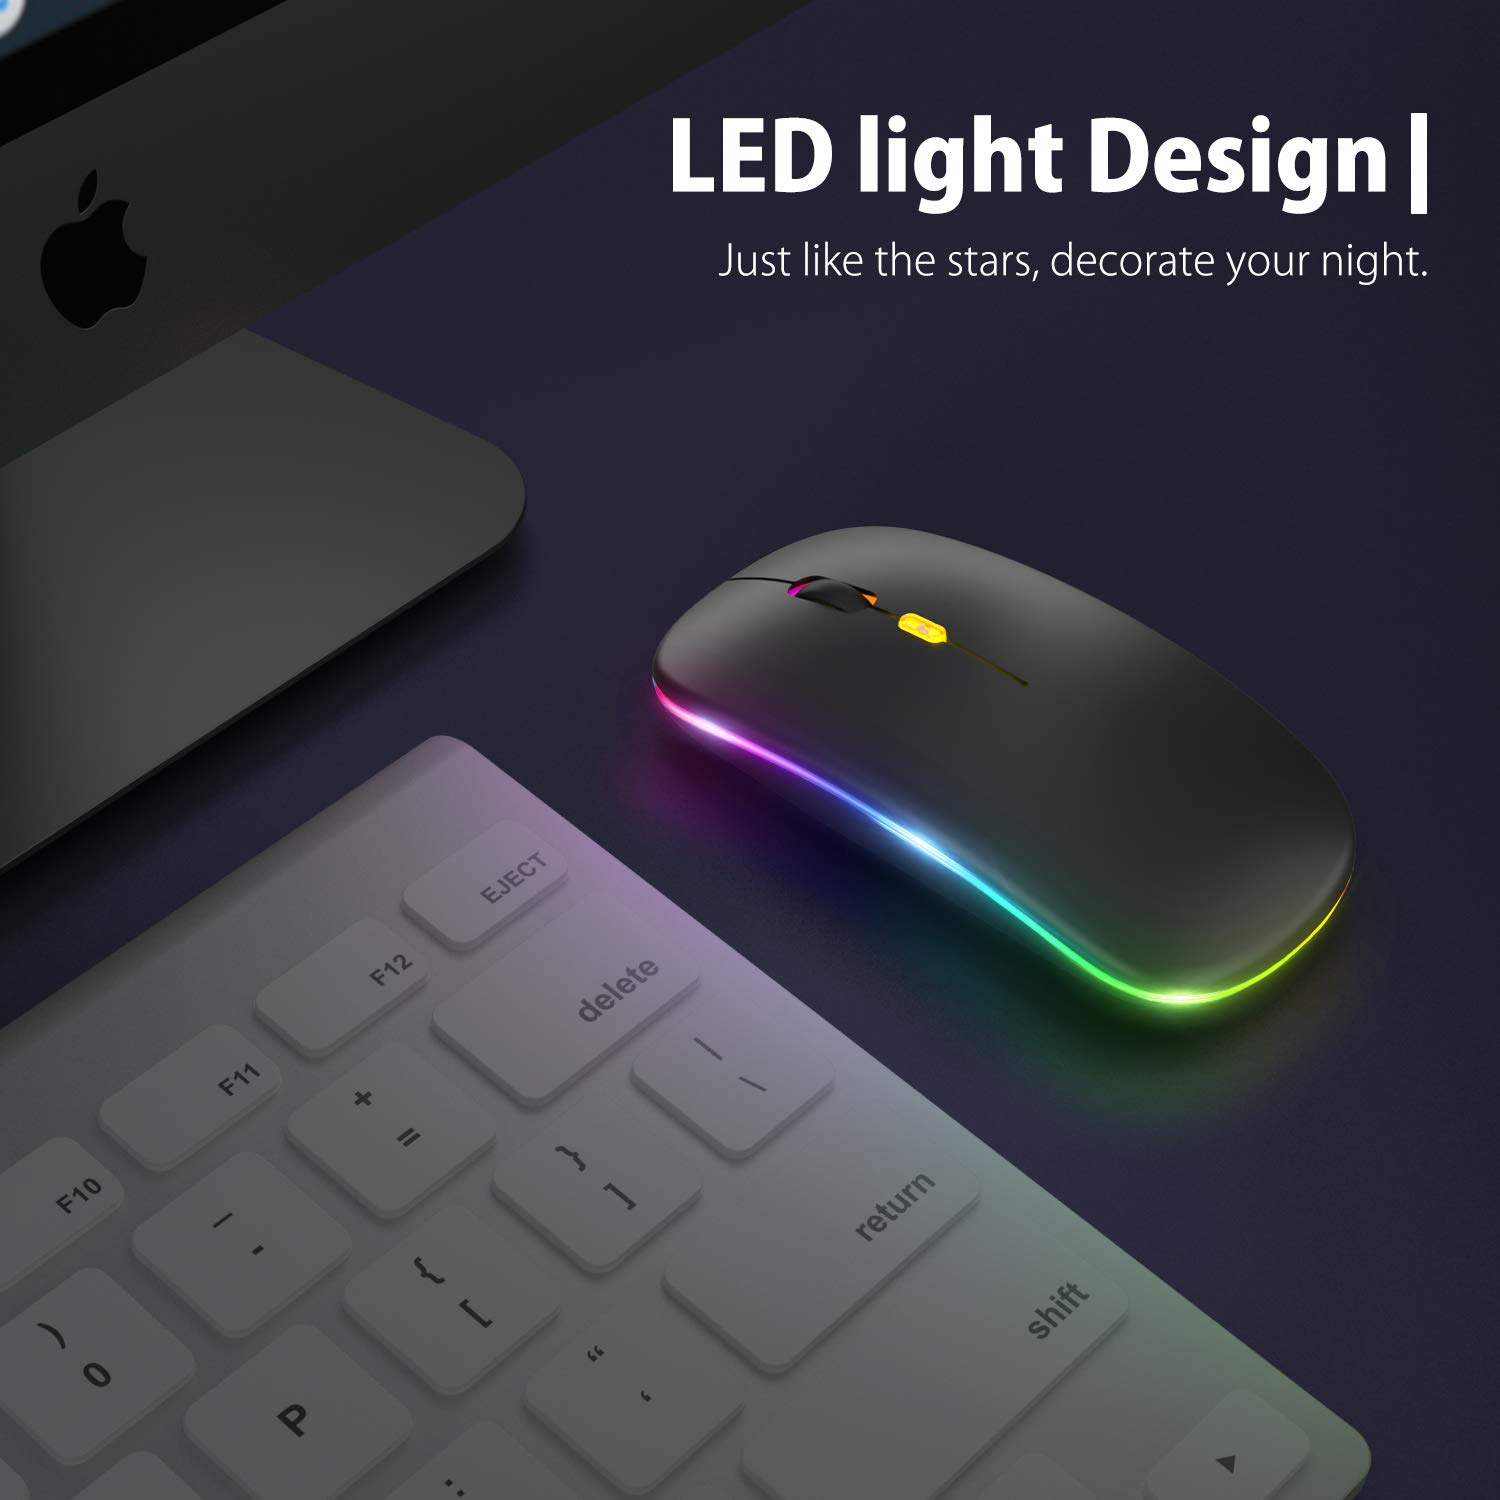 【Upgrade】 LED Wireless Mouse, Slim Silent Mouse 2.4G Portable Mobile Optical Office Mouse with USB & Type-c Receiver, 3 Adjustable DPI Levels for Notebook, PC, Laptop, Computer, MacBook (Black)